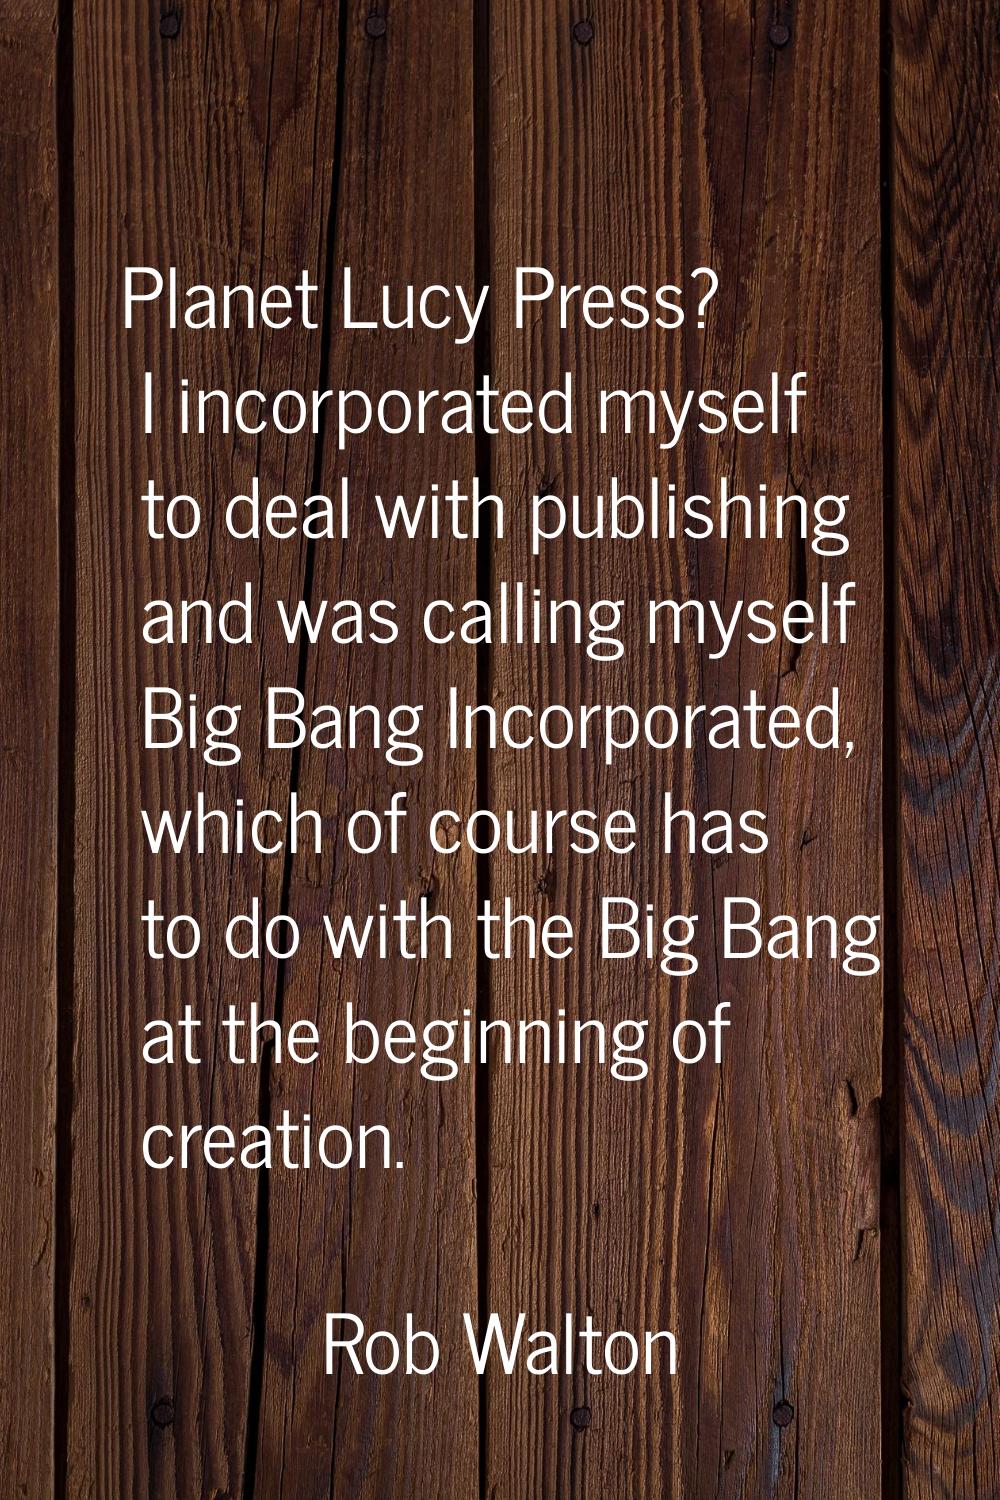 Planet Lucy Press? I incorporated myself to deal with publishing and was calling myself Big Bang In